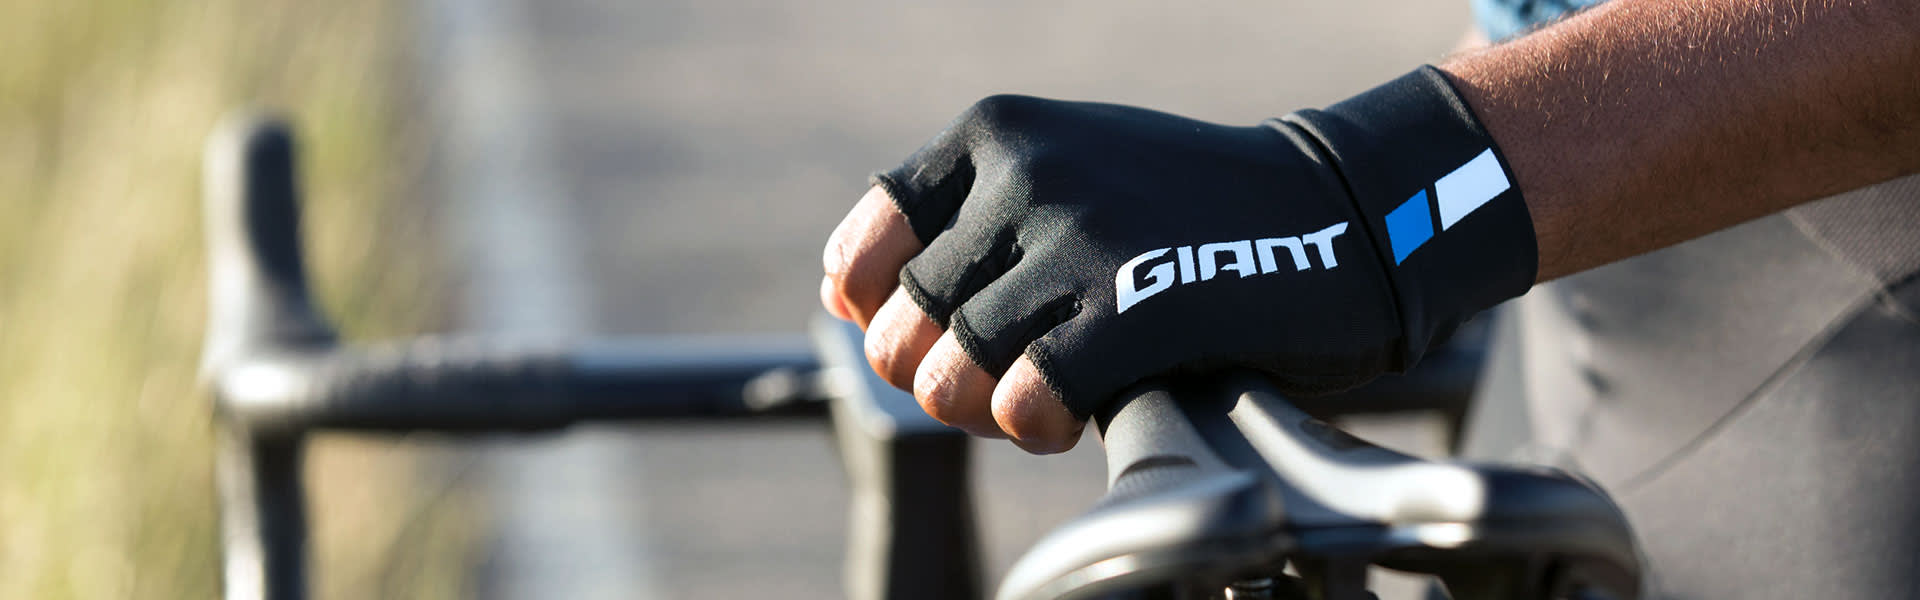 GIANT Alpecin Team Cycling Gloves Bicycle Bike Full Finger Gloves Cycle Mitts UK